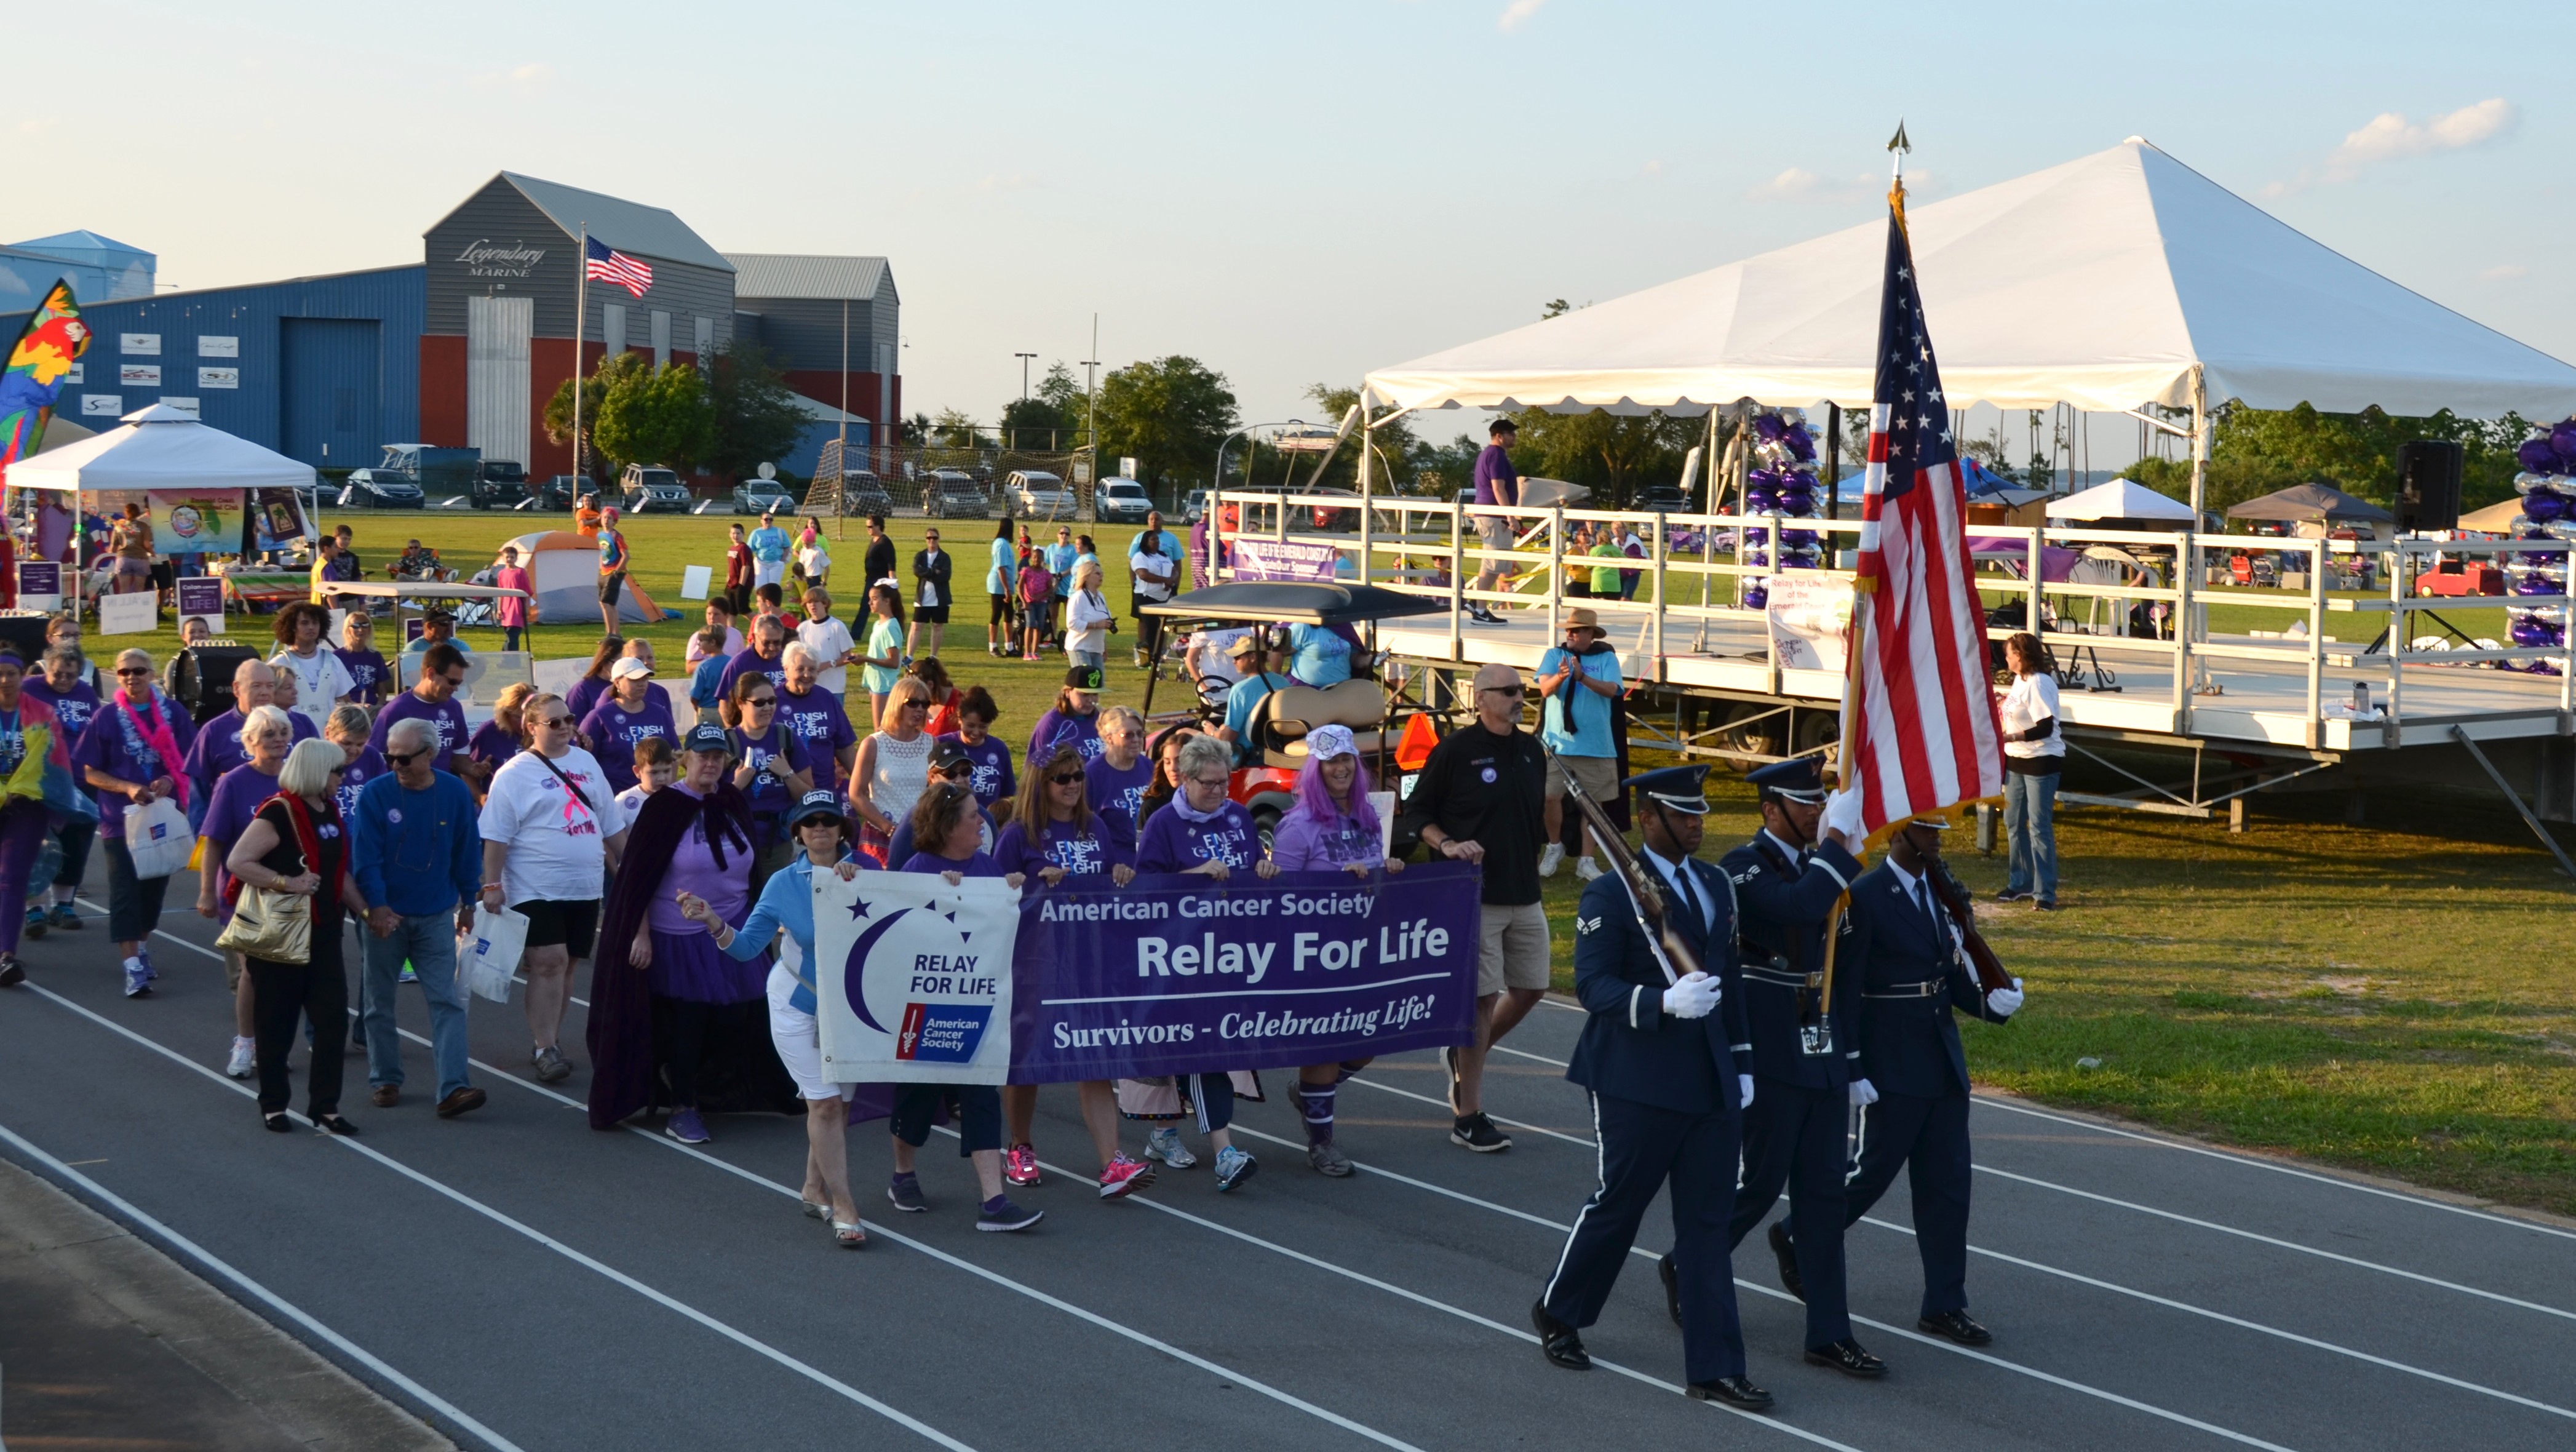 Relay For Life Destin March Events4188 x 2360